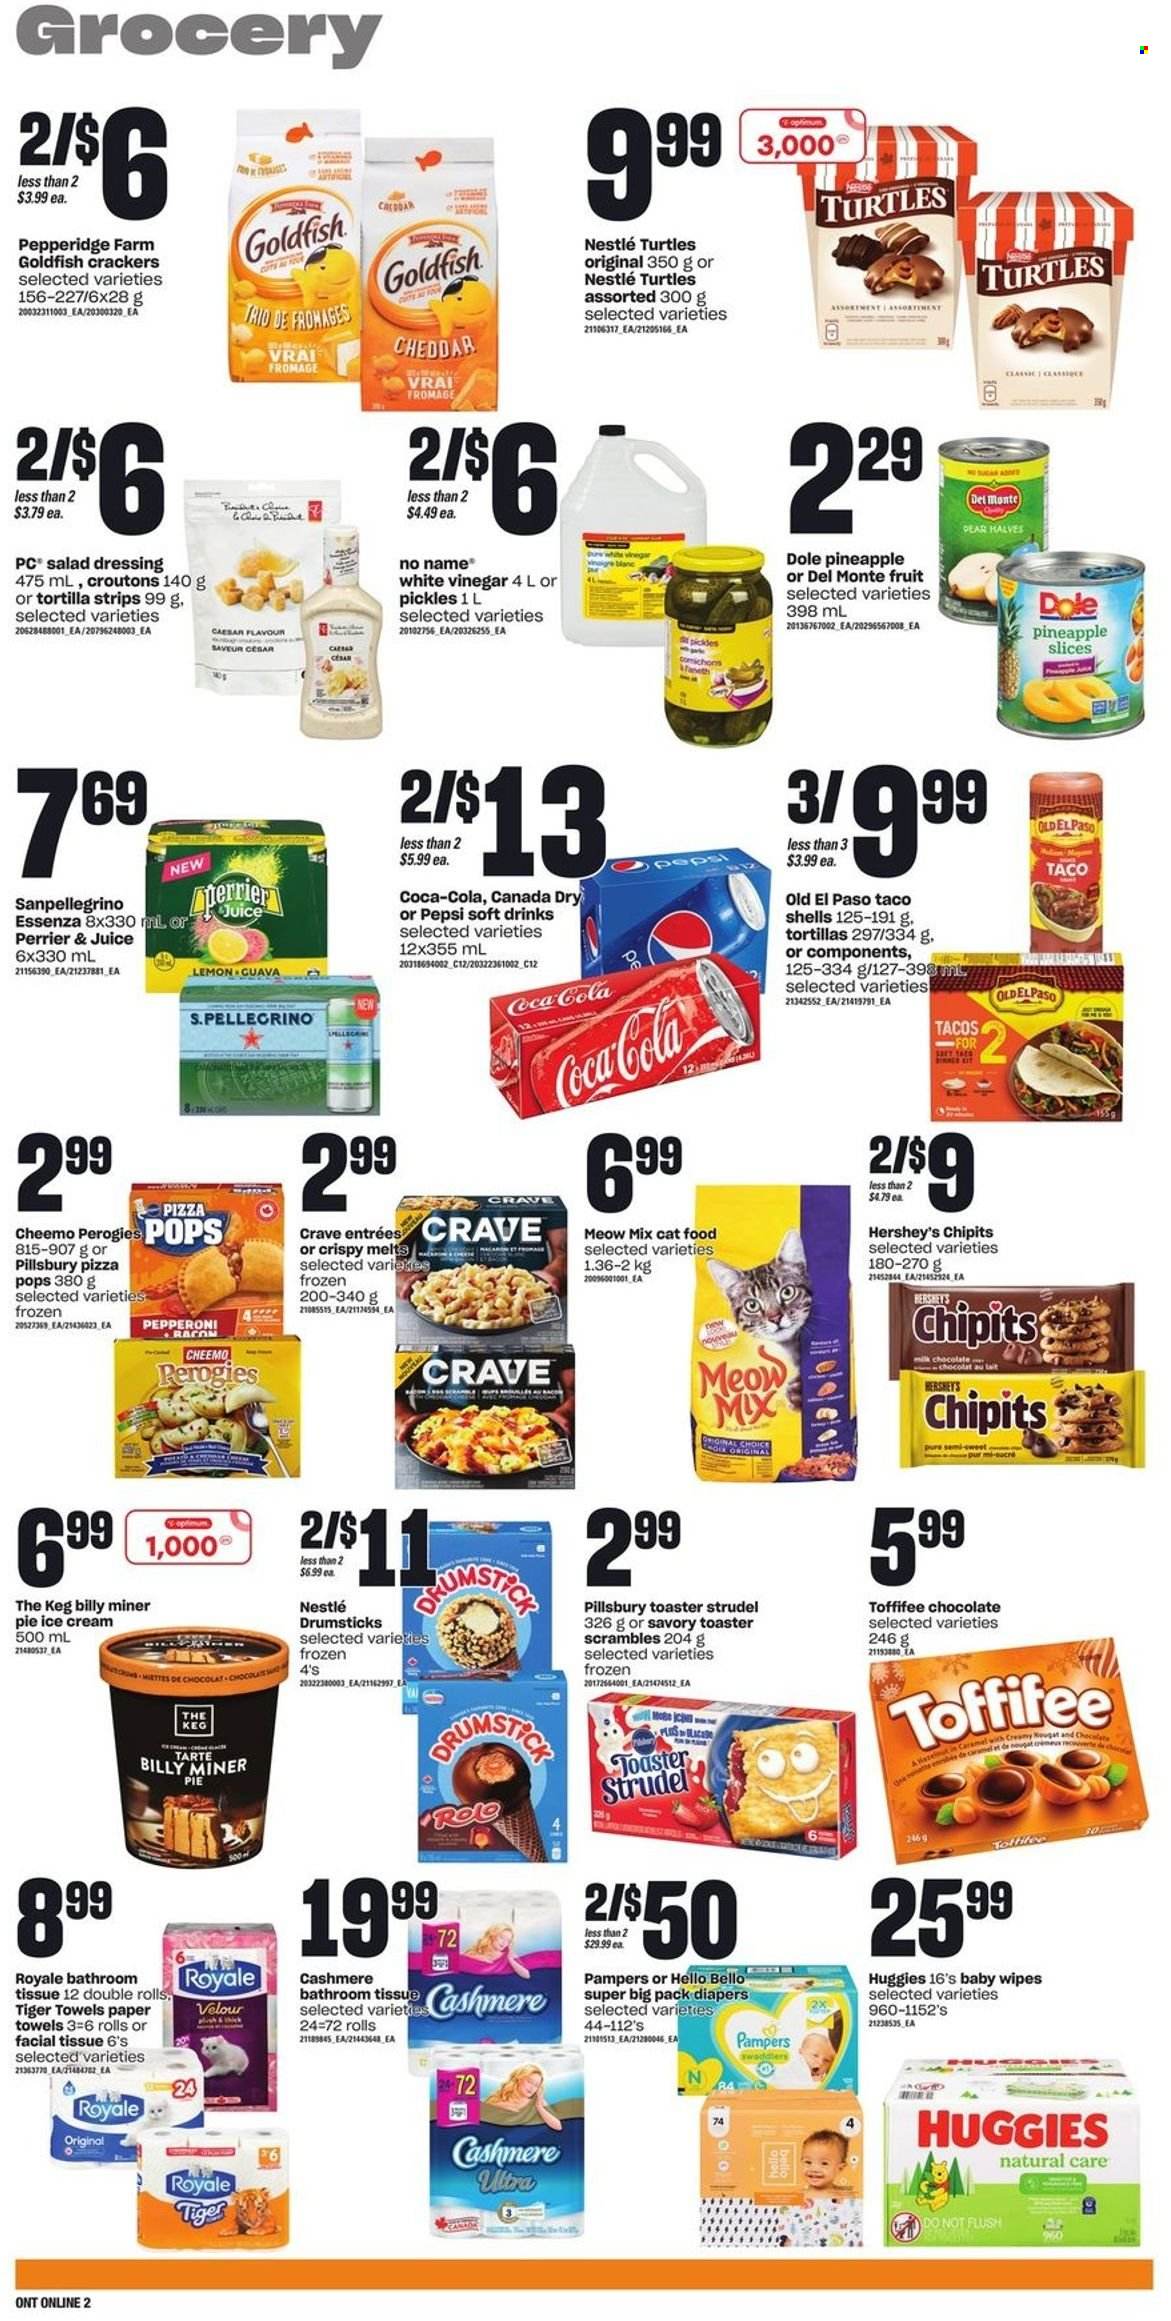 thumbnail - Loblaws Flyer - November 24, 2022 - November 30, 2022 - Sales products - tortillas, pie, strudel, Old El Paso, tacos, Dole, guava, No Name, pizza, Pillsbury, pepperoni, ice cream, Hershey's, milk chocolate, crackers, Goldfish, croutons, pickles, Del Monte, caramel, salad dressing, dressing, vinegar, Camel, Canada Dry, Coca-Cola, Pepsi, juice, soft drink, Perrier, San Pellegrino, wipes, baby wipes, nappies, bath tissue, kitchen towels, paper towels, animal food, turtles, cat food, Optimum, Meow Mix, Nestlé, Huggies, Pampers, nougat. Page 6.